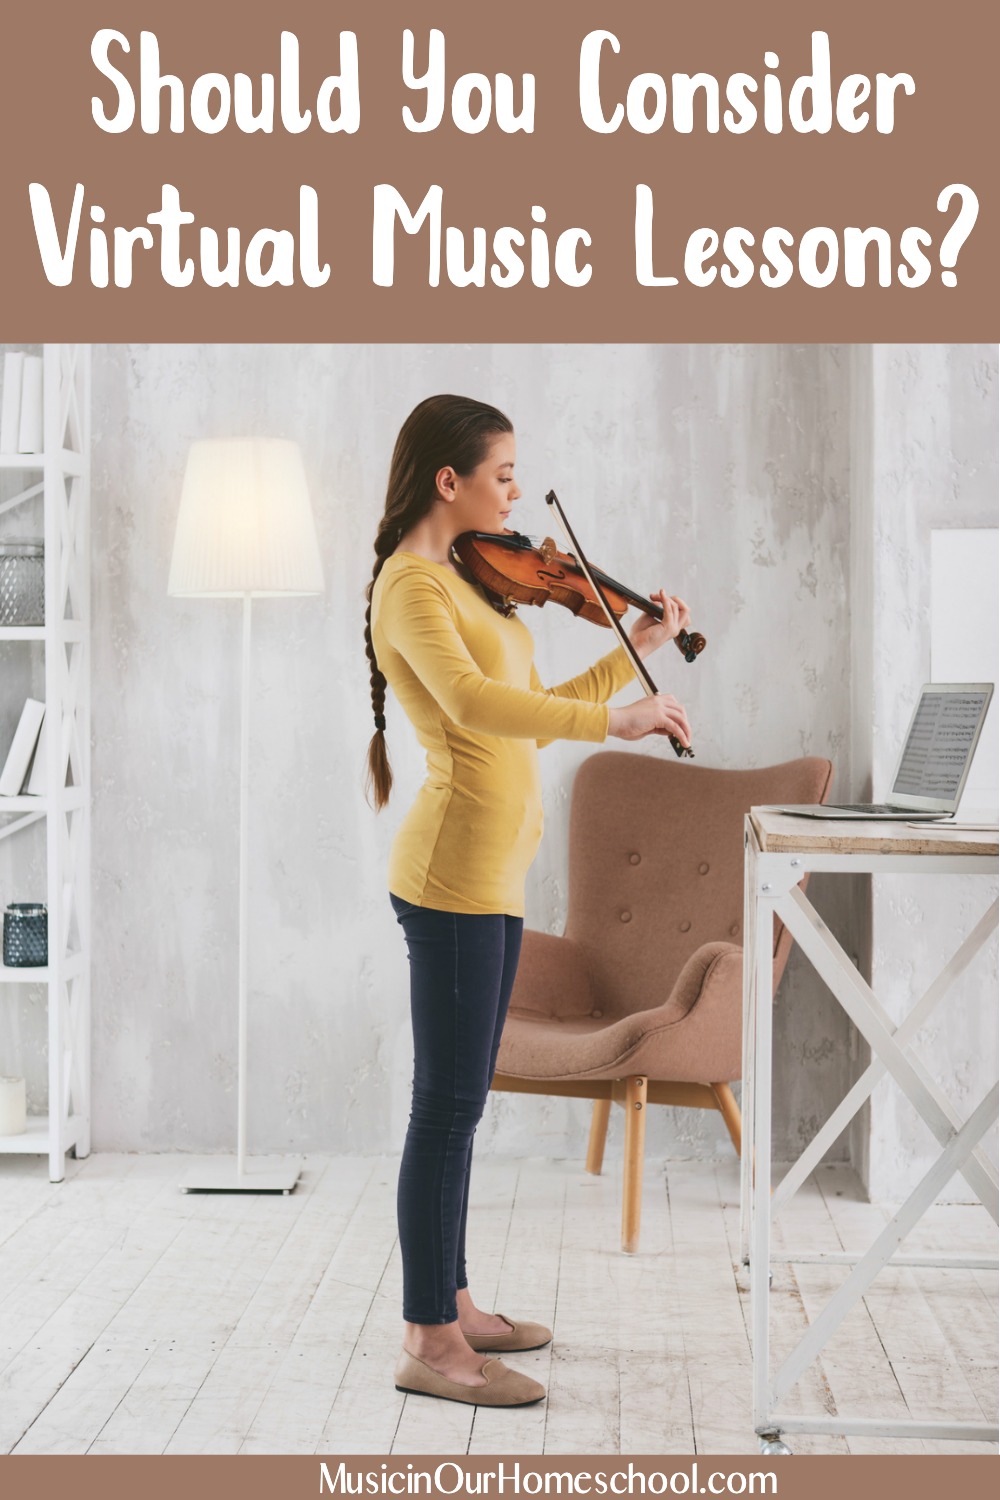 Should You Consider Virtual Music Lessons in your homeschool? See the pros and cons here.